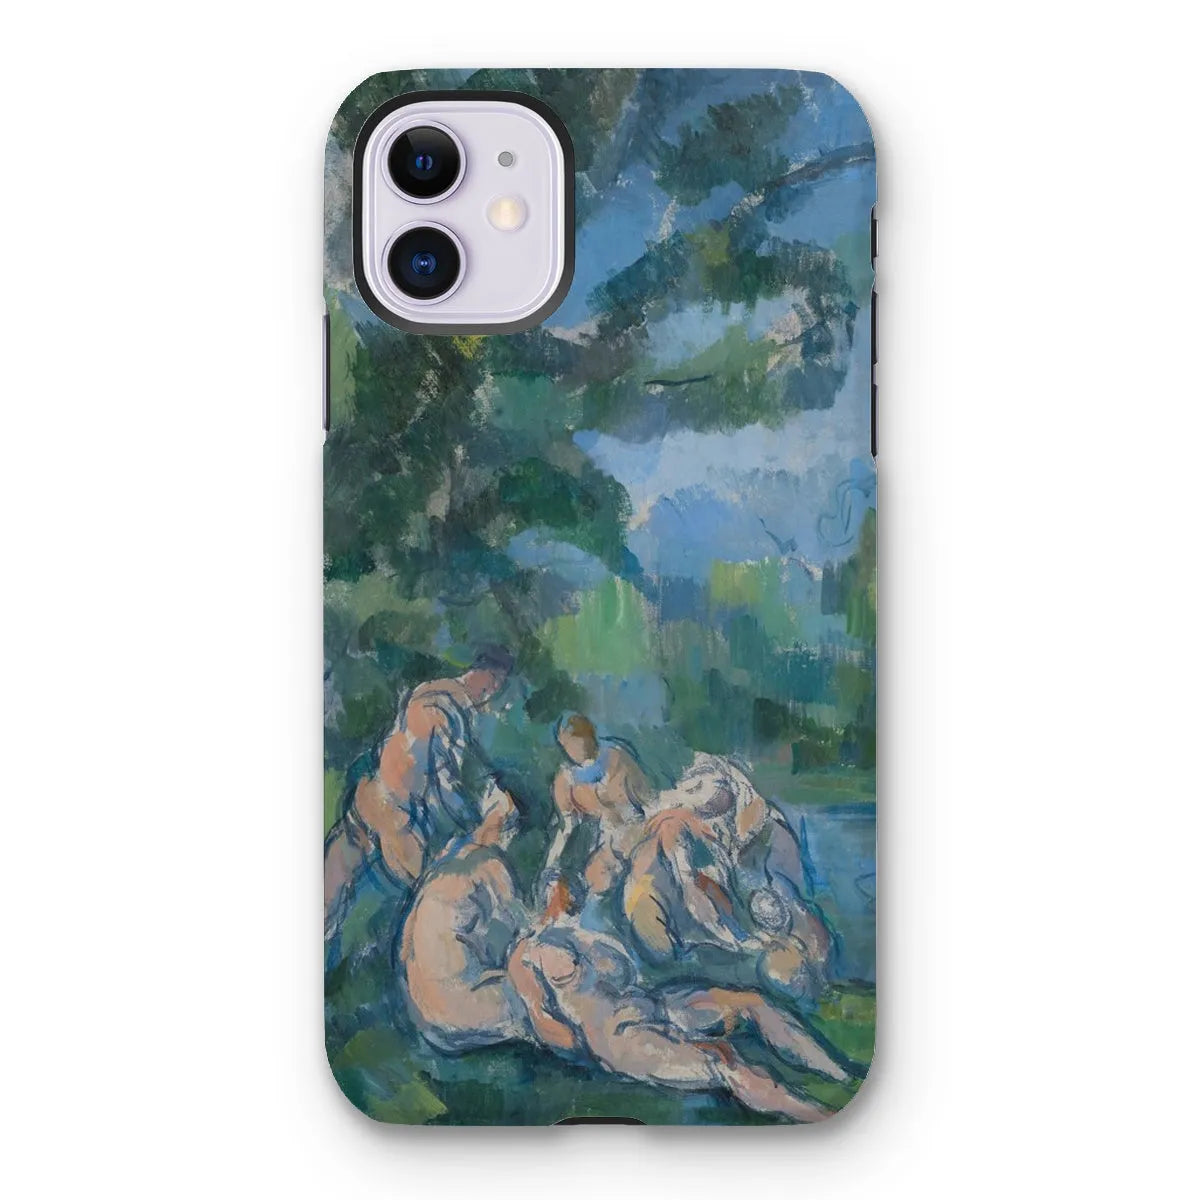 The Bathers - Post-impressionism Phone Case - Paul Cezanne - Iphone 11 / Matte - Mobile Phone Cases - Aesthetic Art